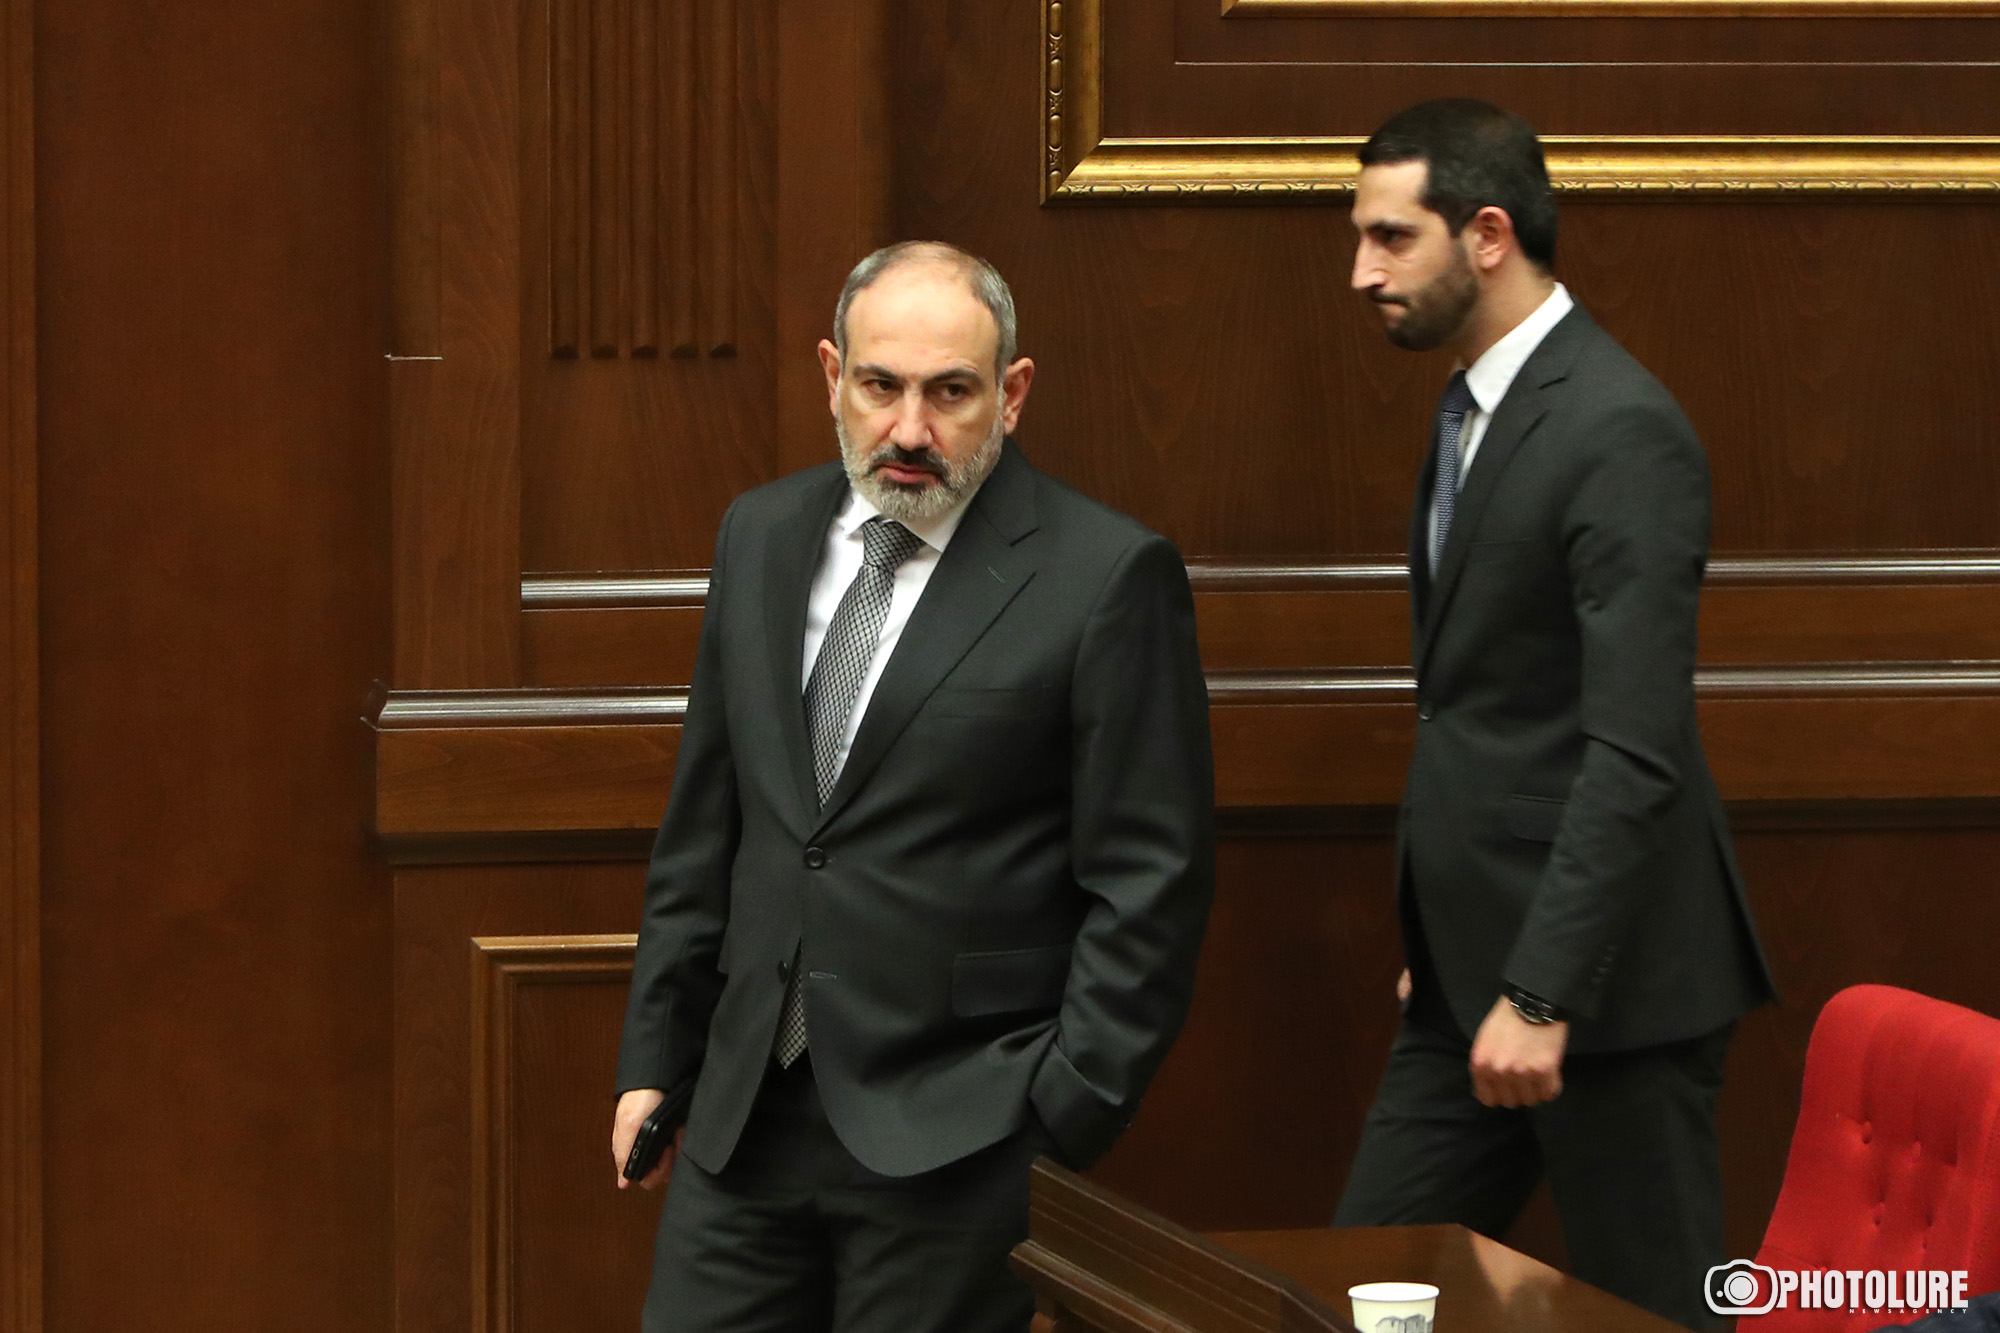 Pashinyan seems to make veiled Russia criticisms in independence anniversary note